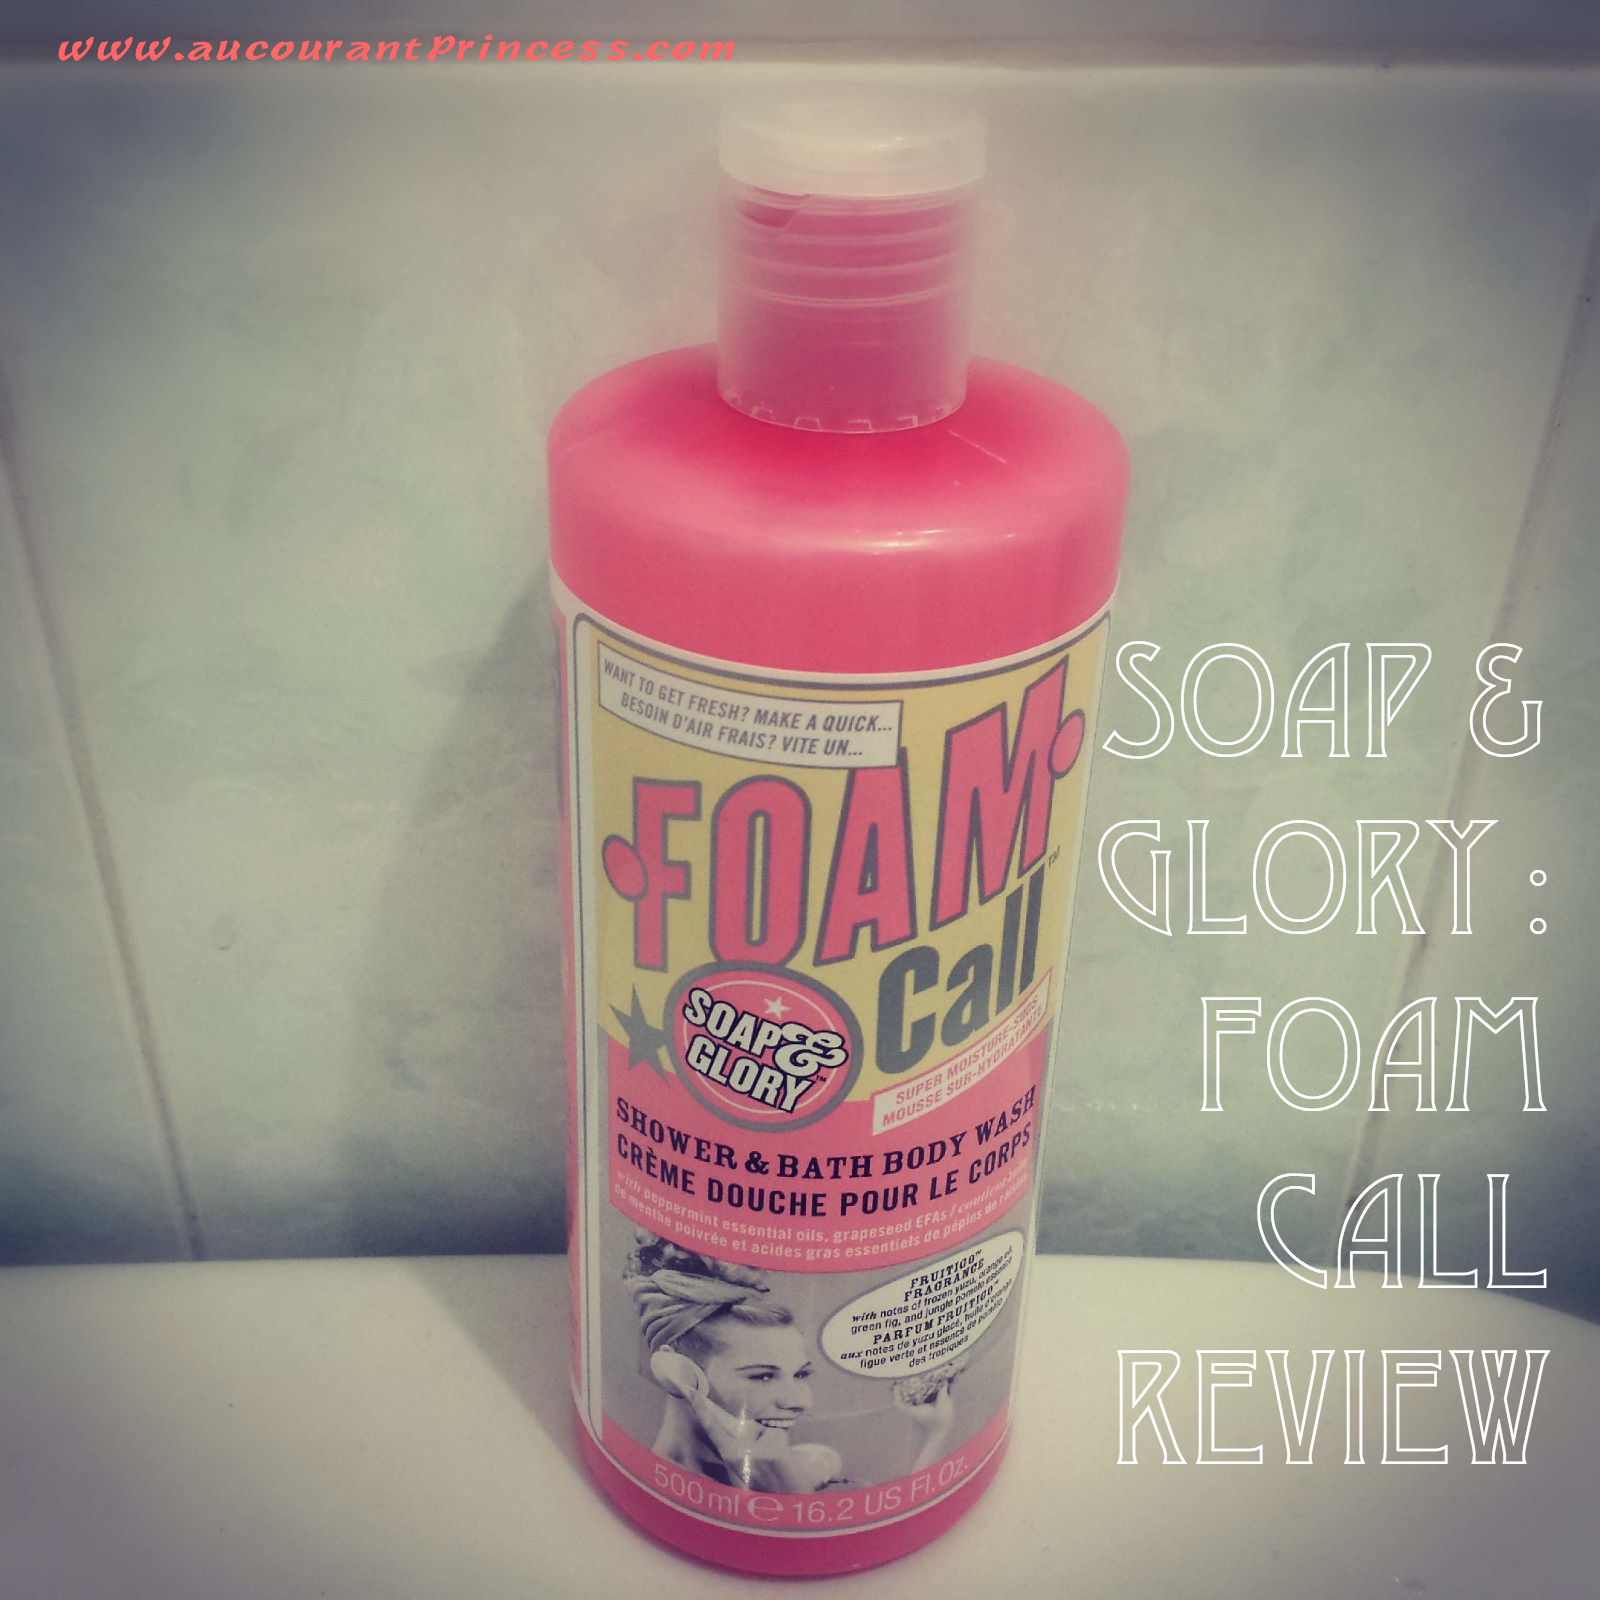 Soap and Glory Foam Call Dual-use Shower and Bath Body Wash Product Review